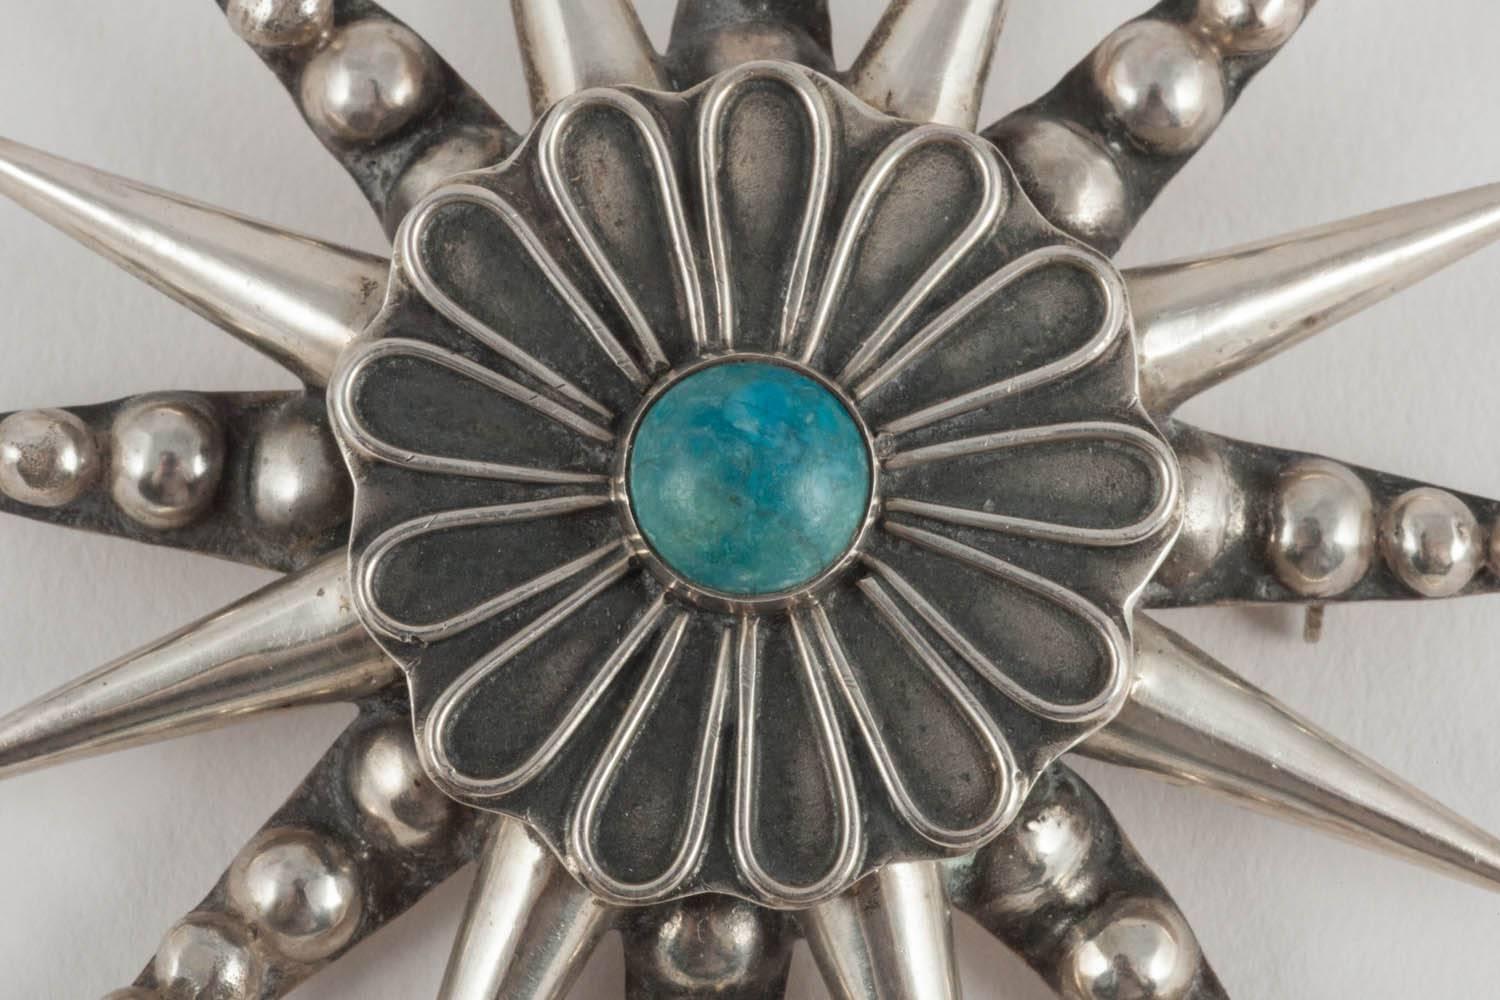 This is a dramatic Bohemian style pendant or brooch hallmarked, but not signed, with a makers mark. The two layers of pattern, on closer inspection, look like a star on the outside, and a daisy on the inner ring, with the lovely blue turquoise